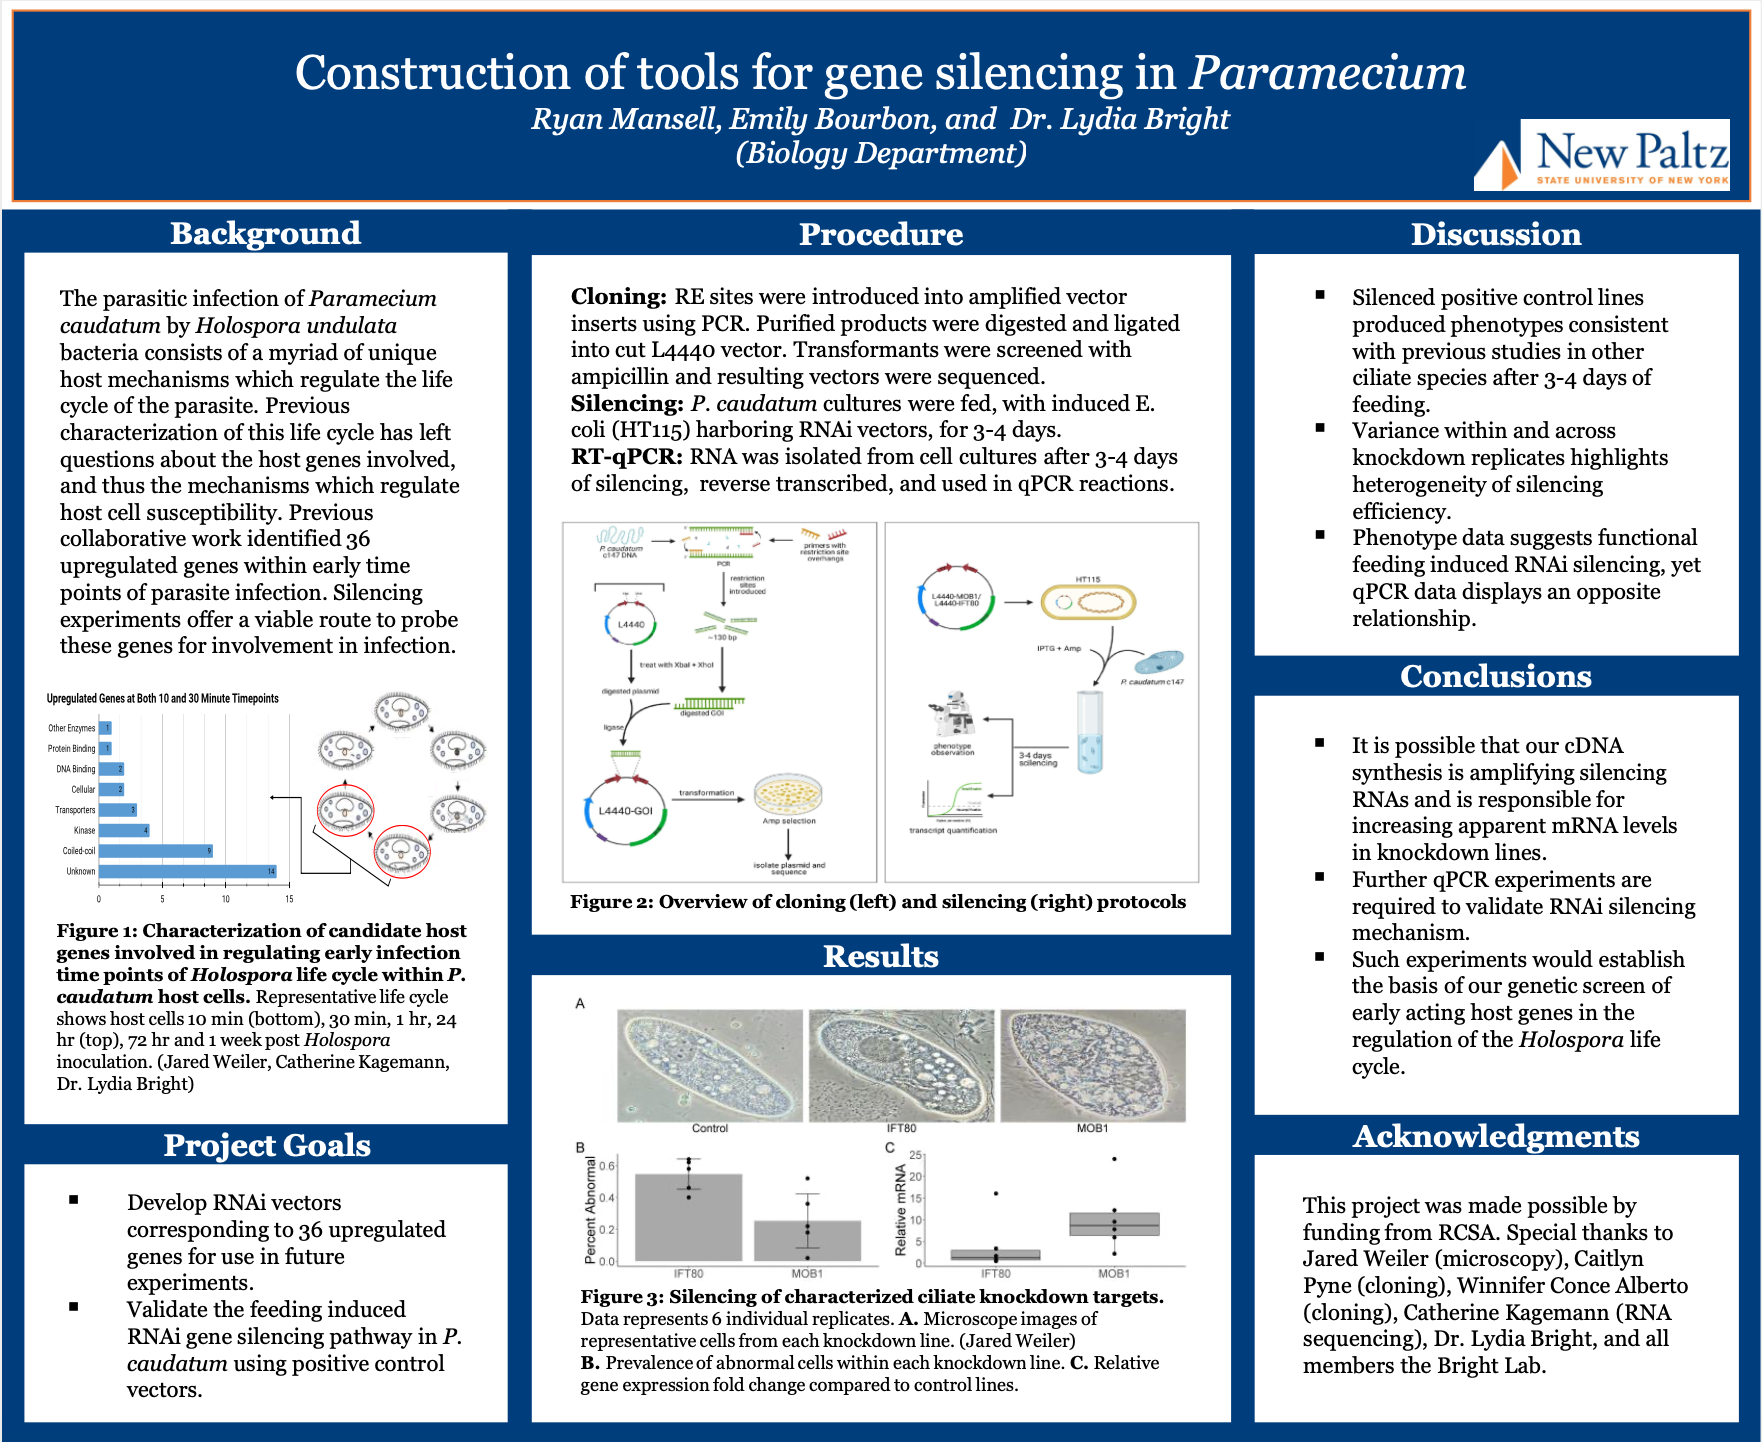 Showcase Image for Construction of Tools for Gene Silencing in Paramecium